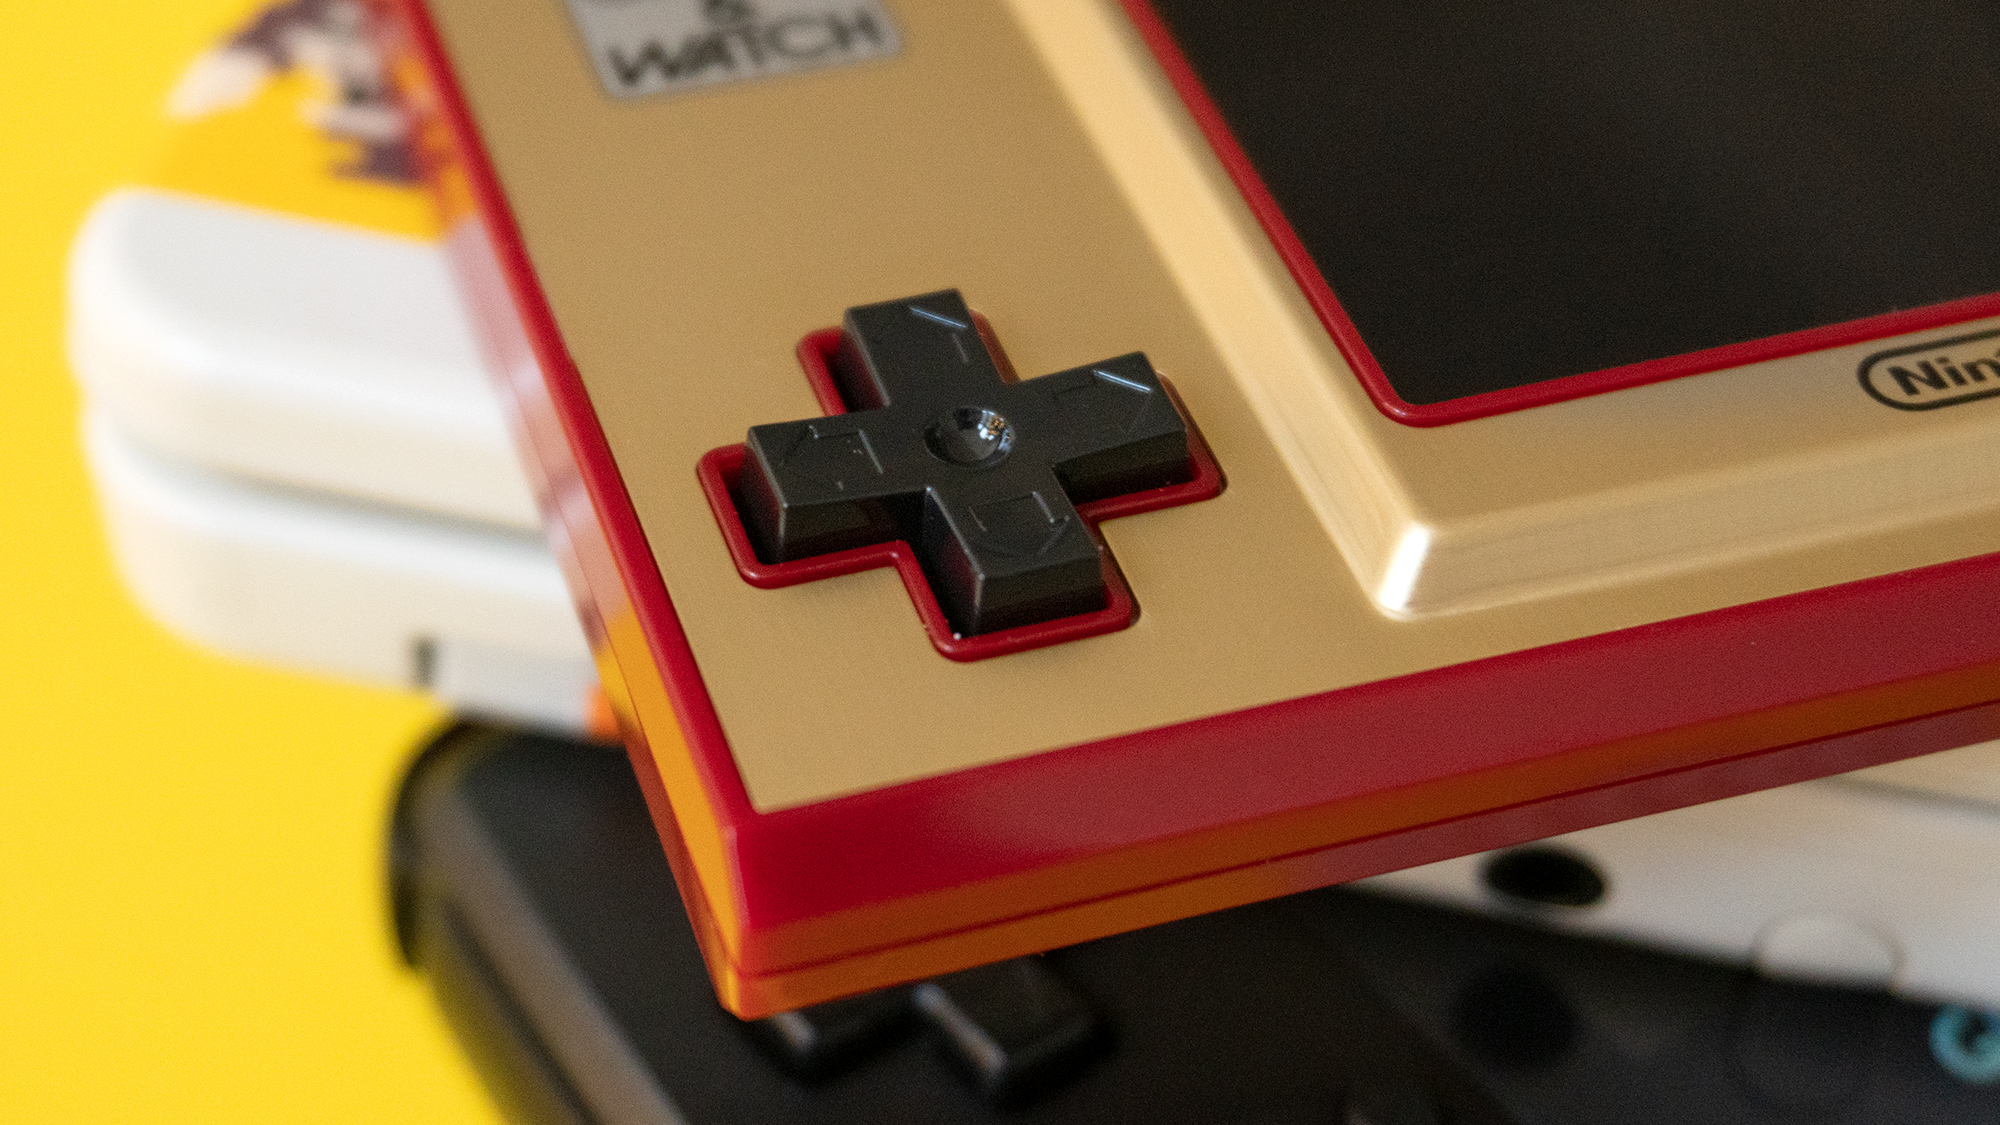 The Game & Watch's D-pad feels great, but would expect anything less from Nintendo? (Photo: Andrew Liszewski - Gizmodo)